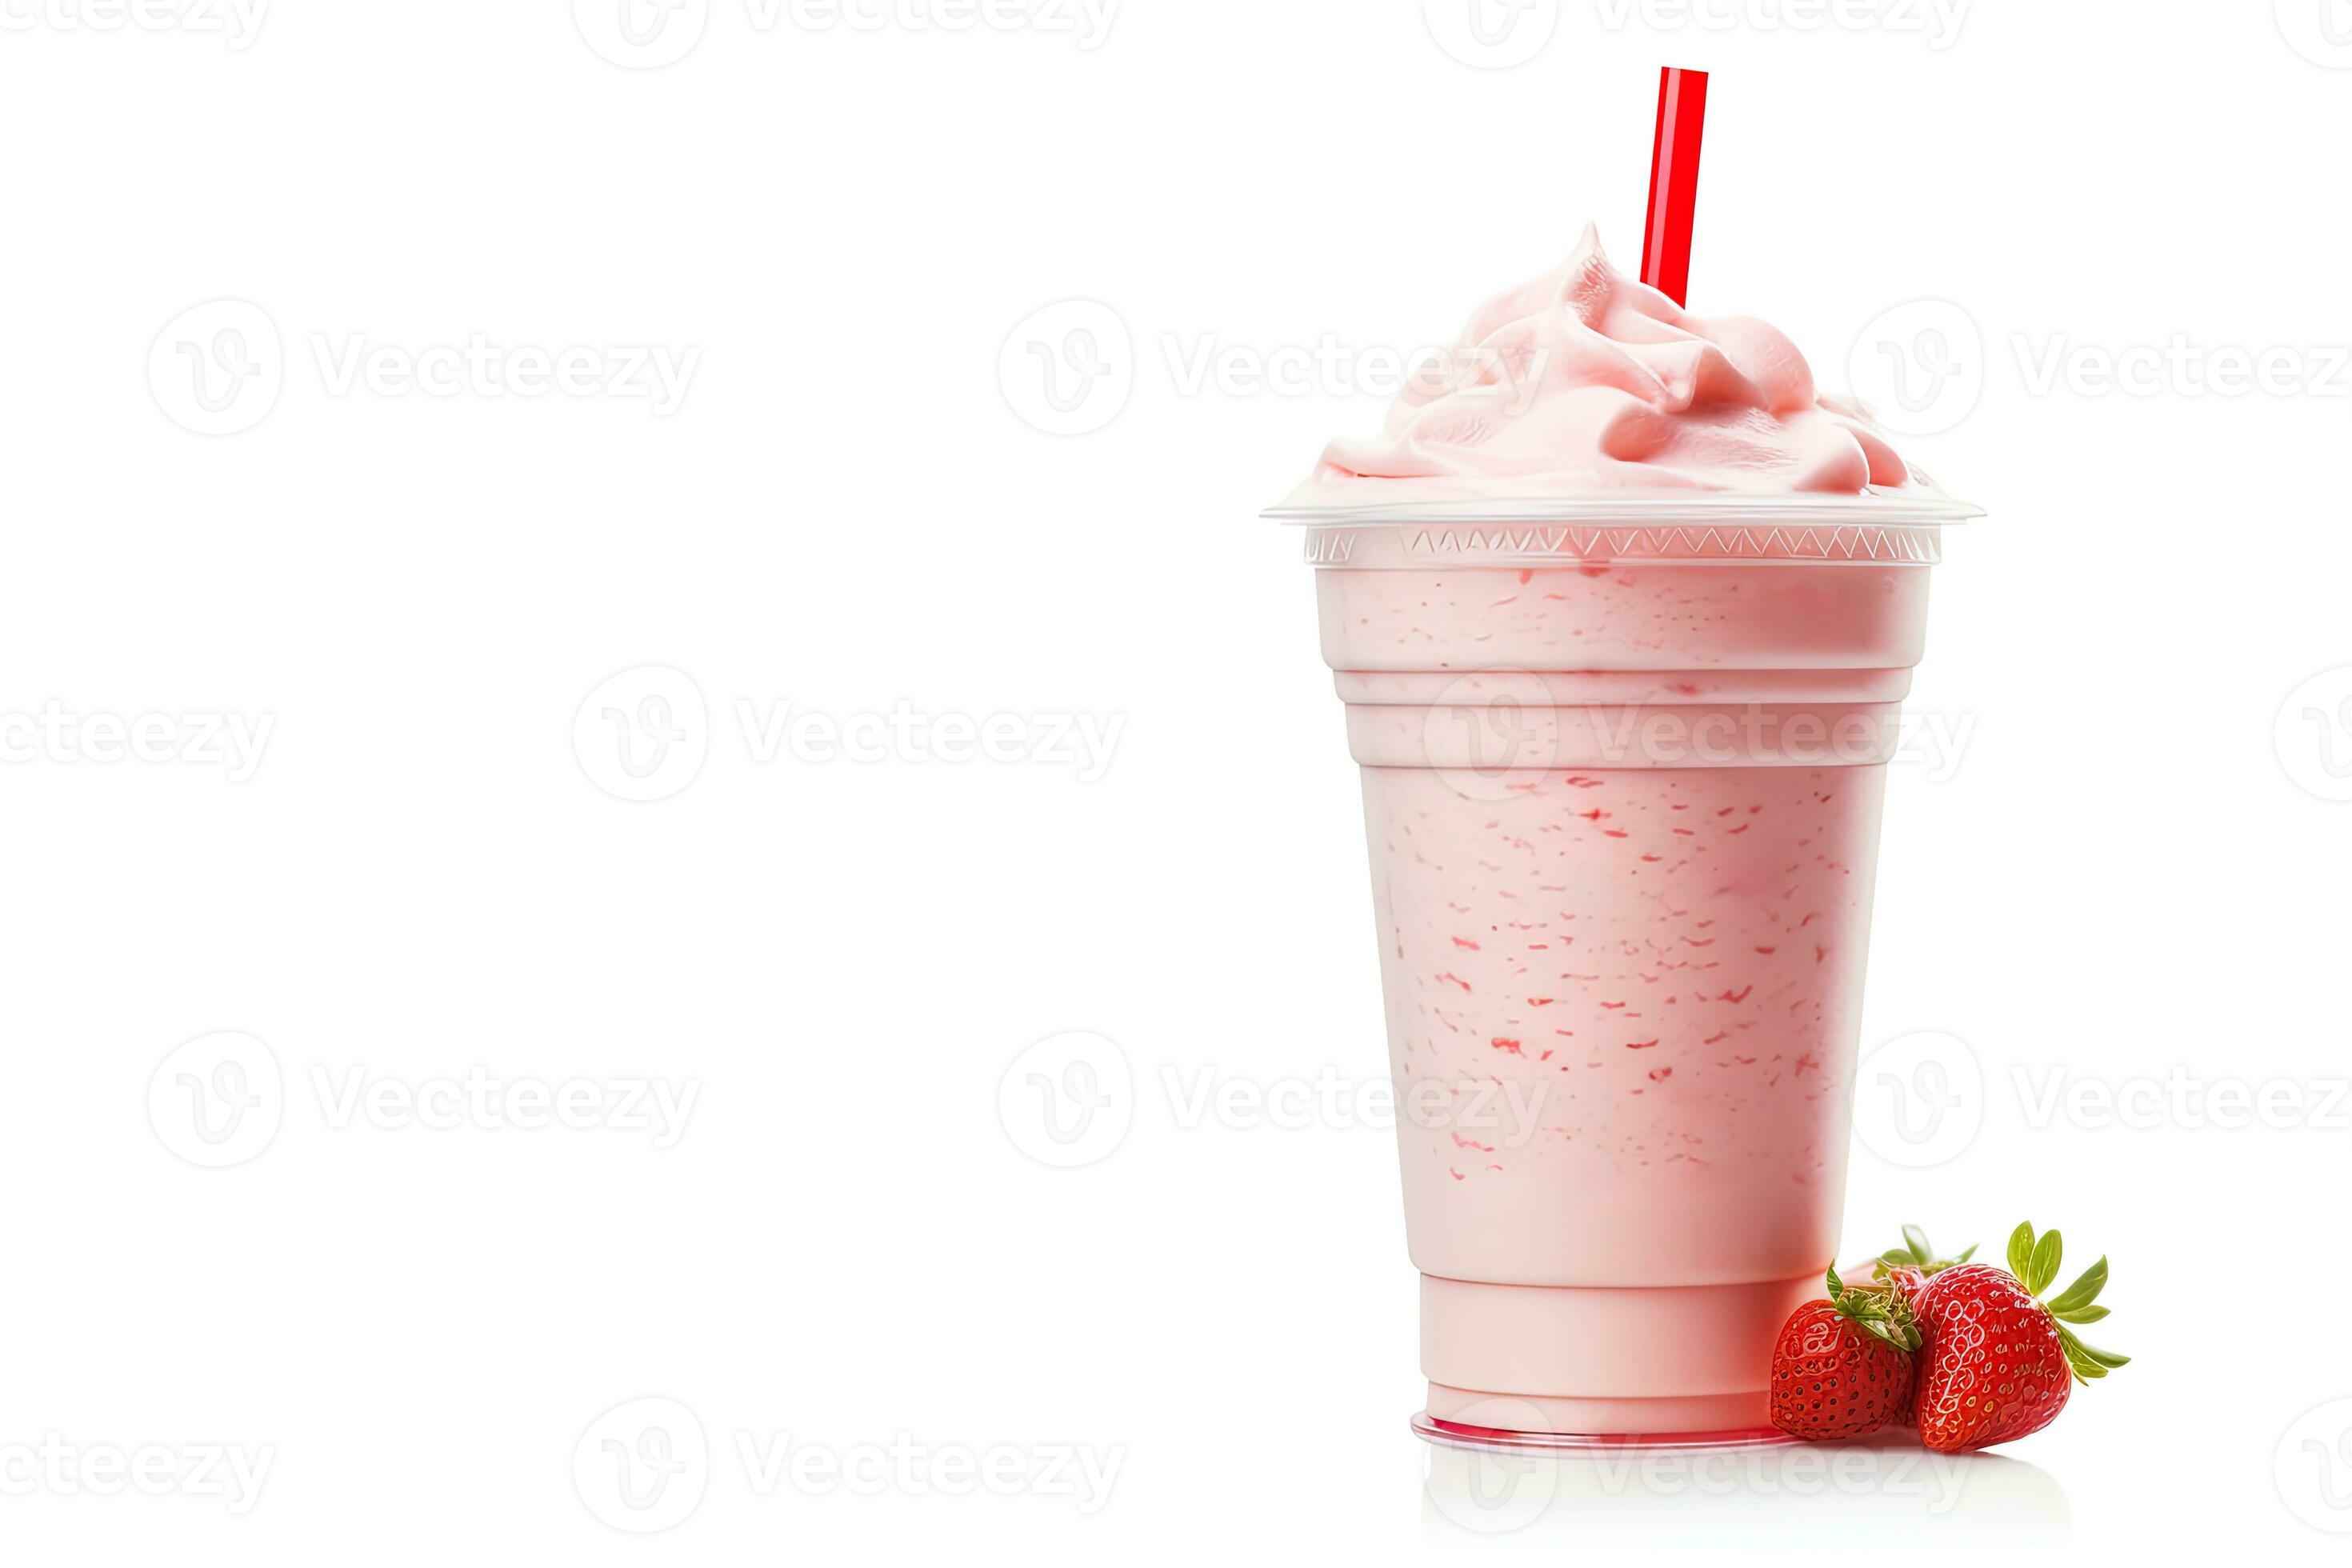 https://static.vecteezy.com/system/resources/previews/026/278/545/large_2x/strawberry-milkshake-in-plastic-takeaway-cup-isolated-on-white-background-with-copy-space-ai-generated-photo.jpg